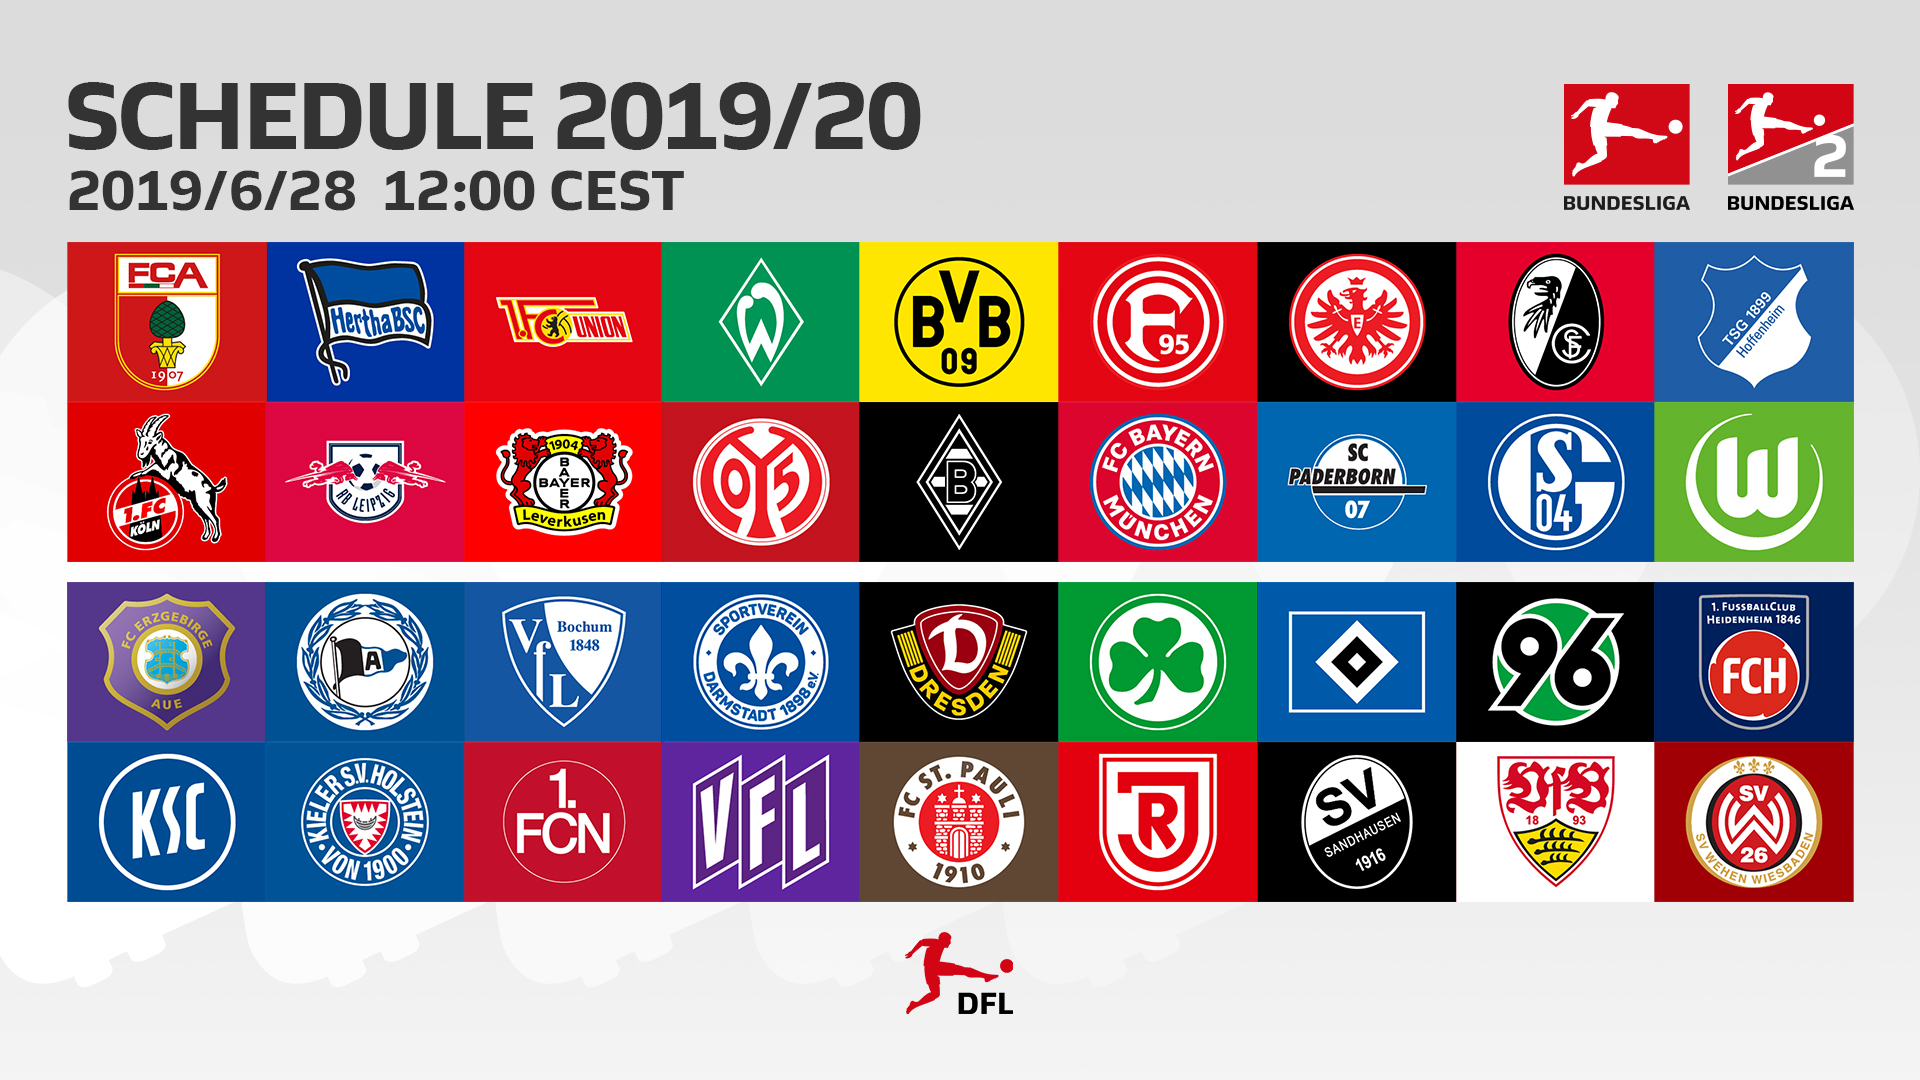 NTV to air Bundesliga and Europa League matches in the 2019/2020 season